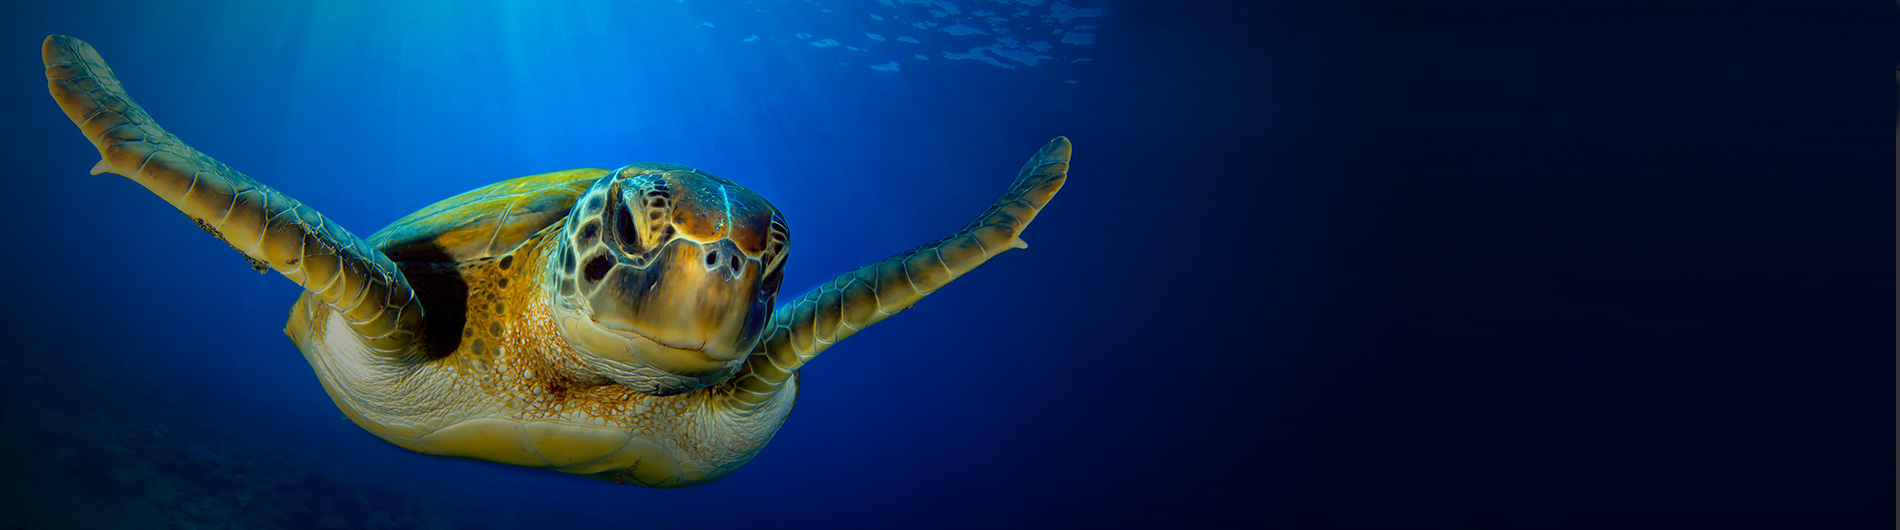 colorful banner with sea turtle in the ocean